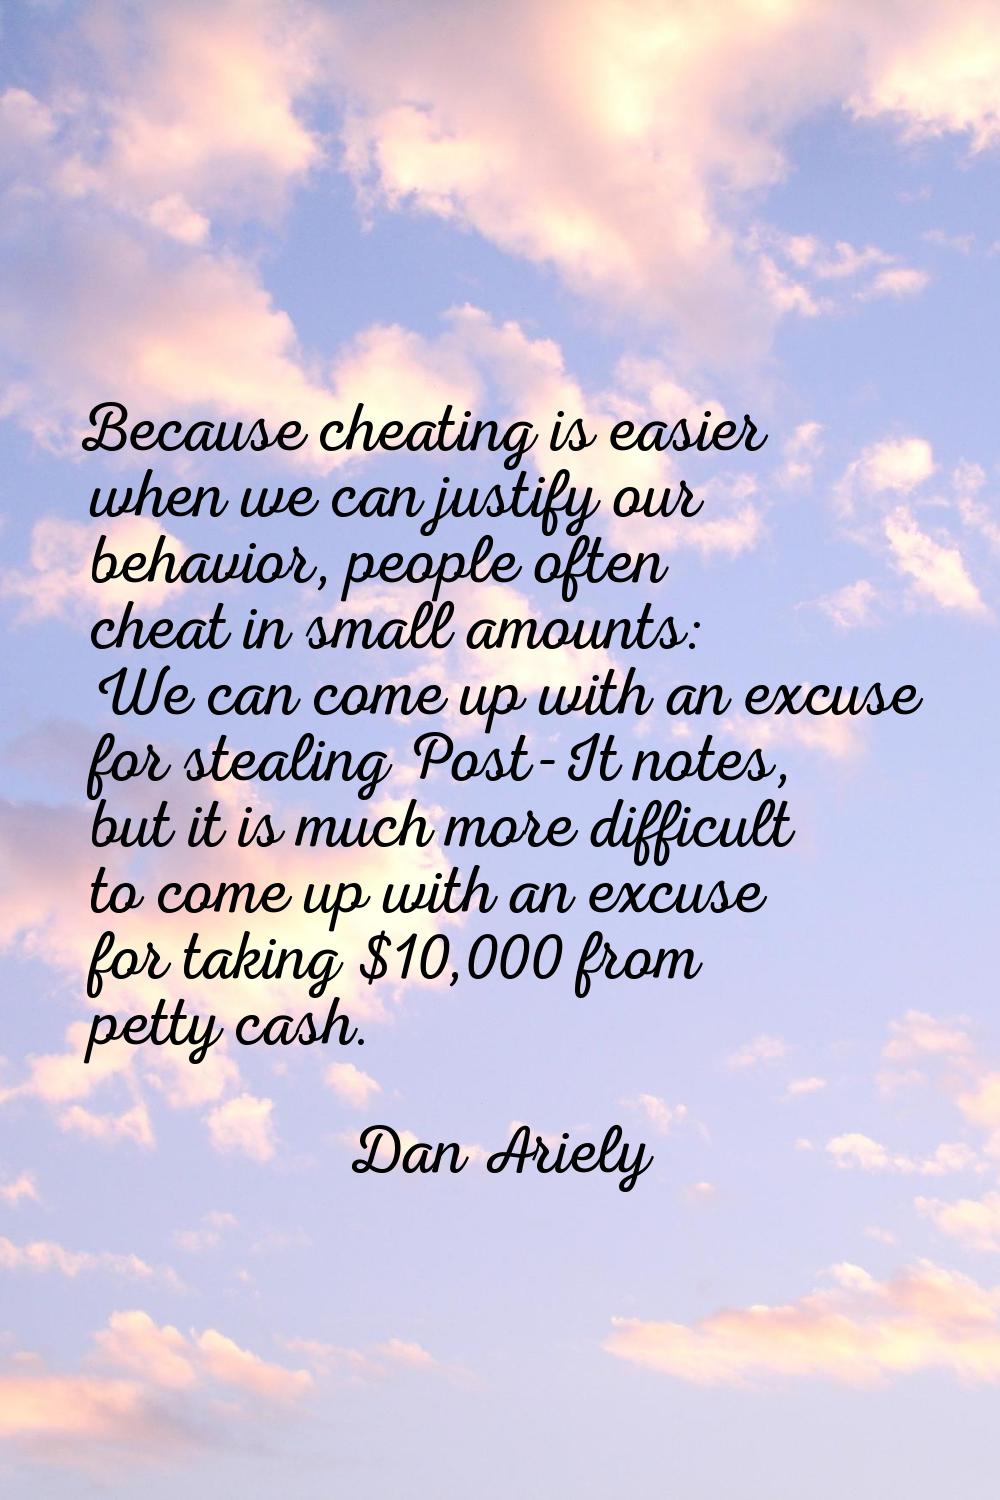 Because cheating is easier when we can justify our behavior, people often cheat in small amounts: W